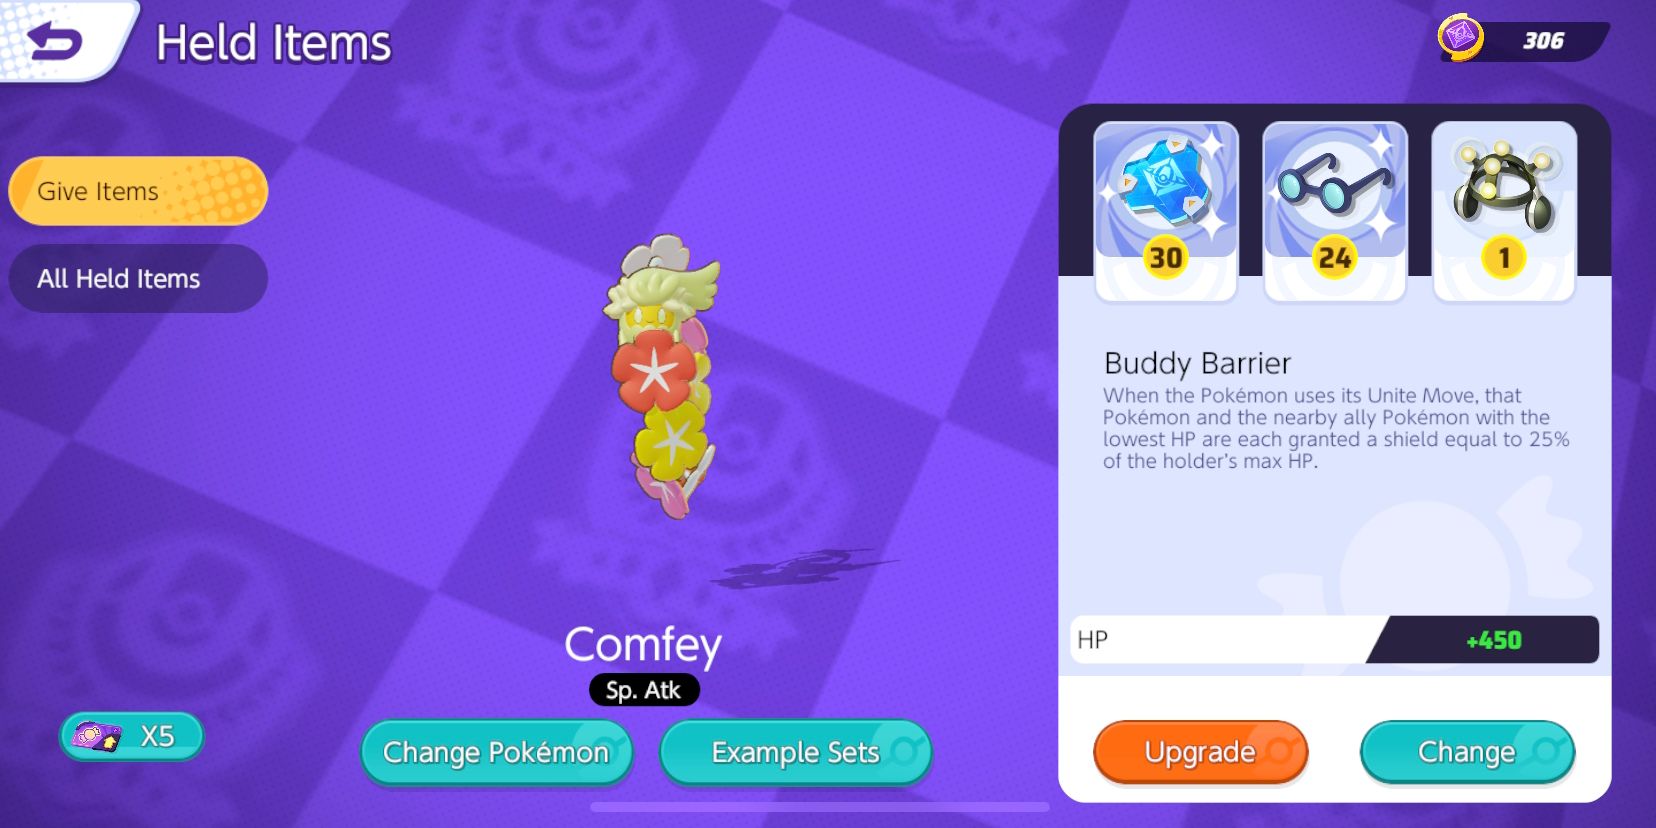 Comfey's Held Item selection screen with Buddy Barrier, Wise Glasses, and Exp. Share selected